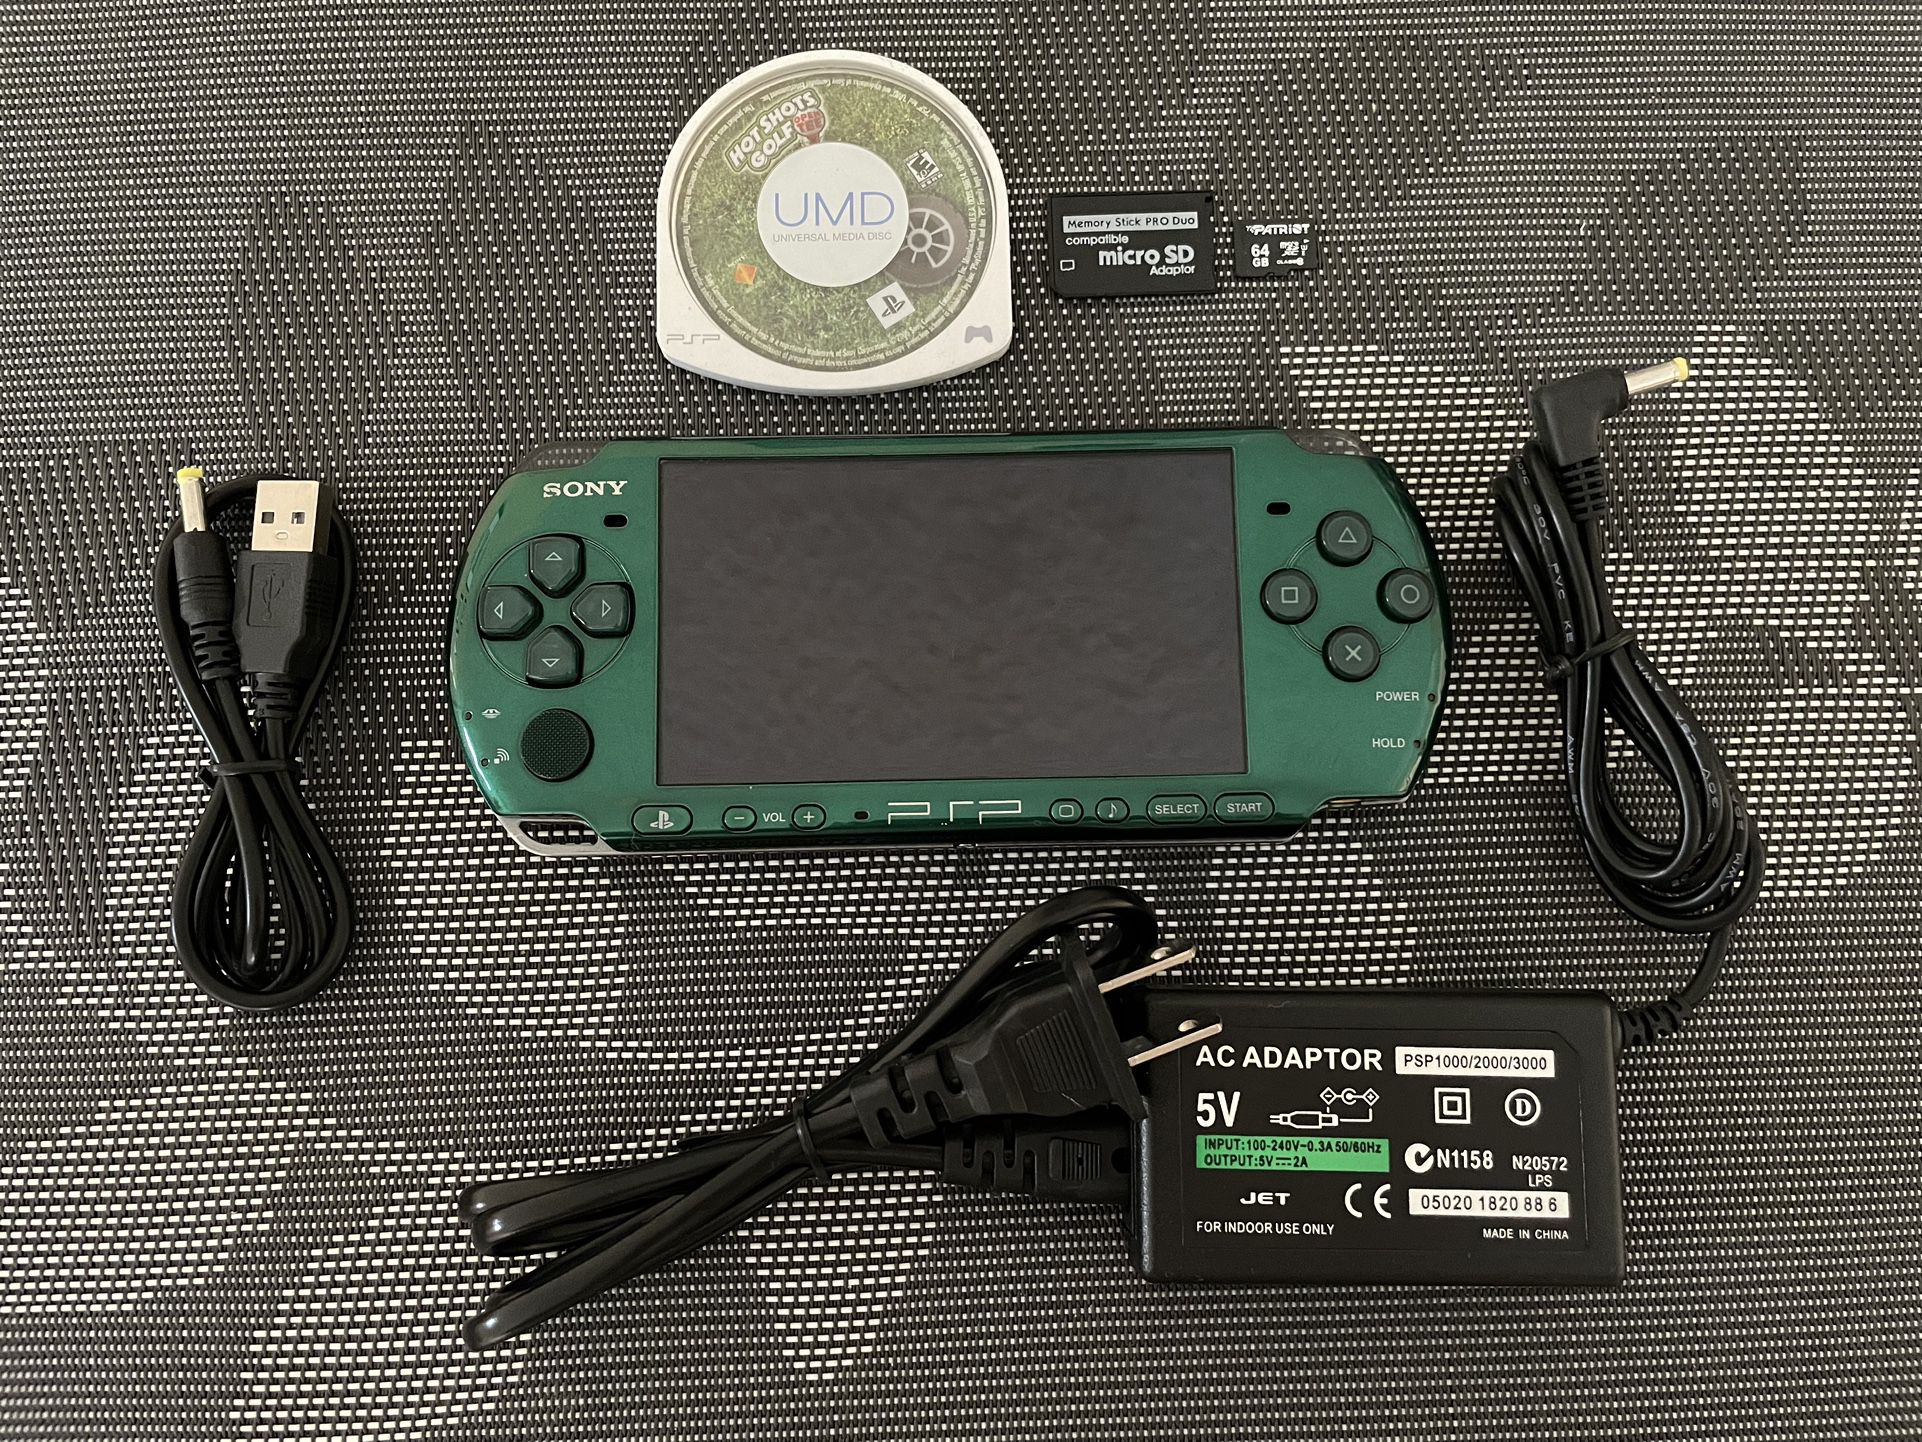 Psp 3000 Green w/ 7000+ Games Saved In The 64GB Memory Card